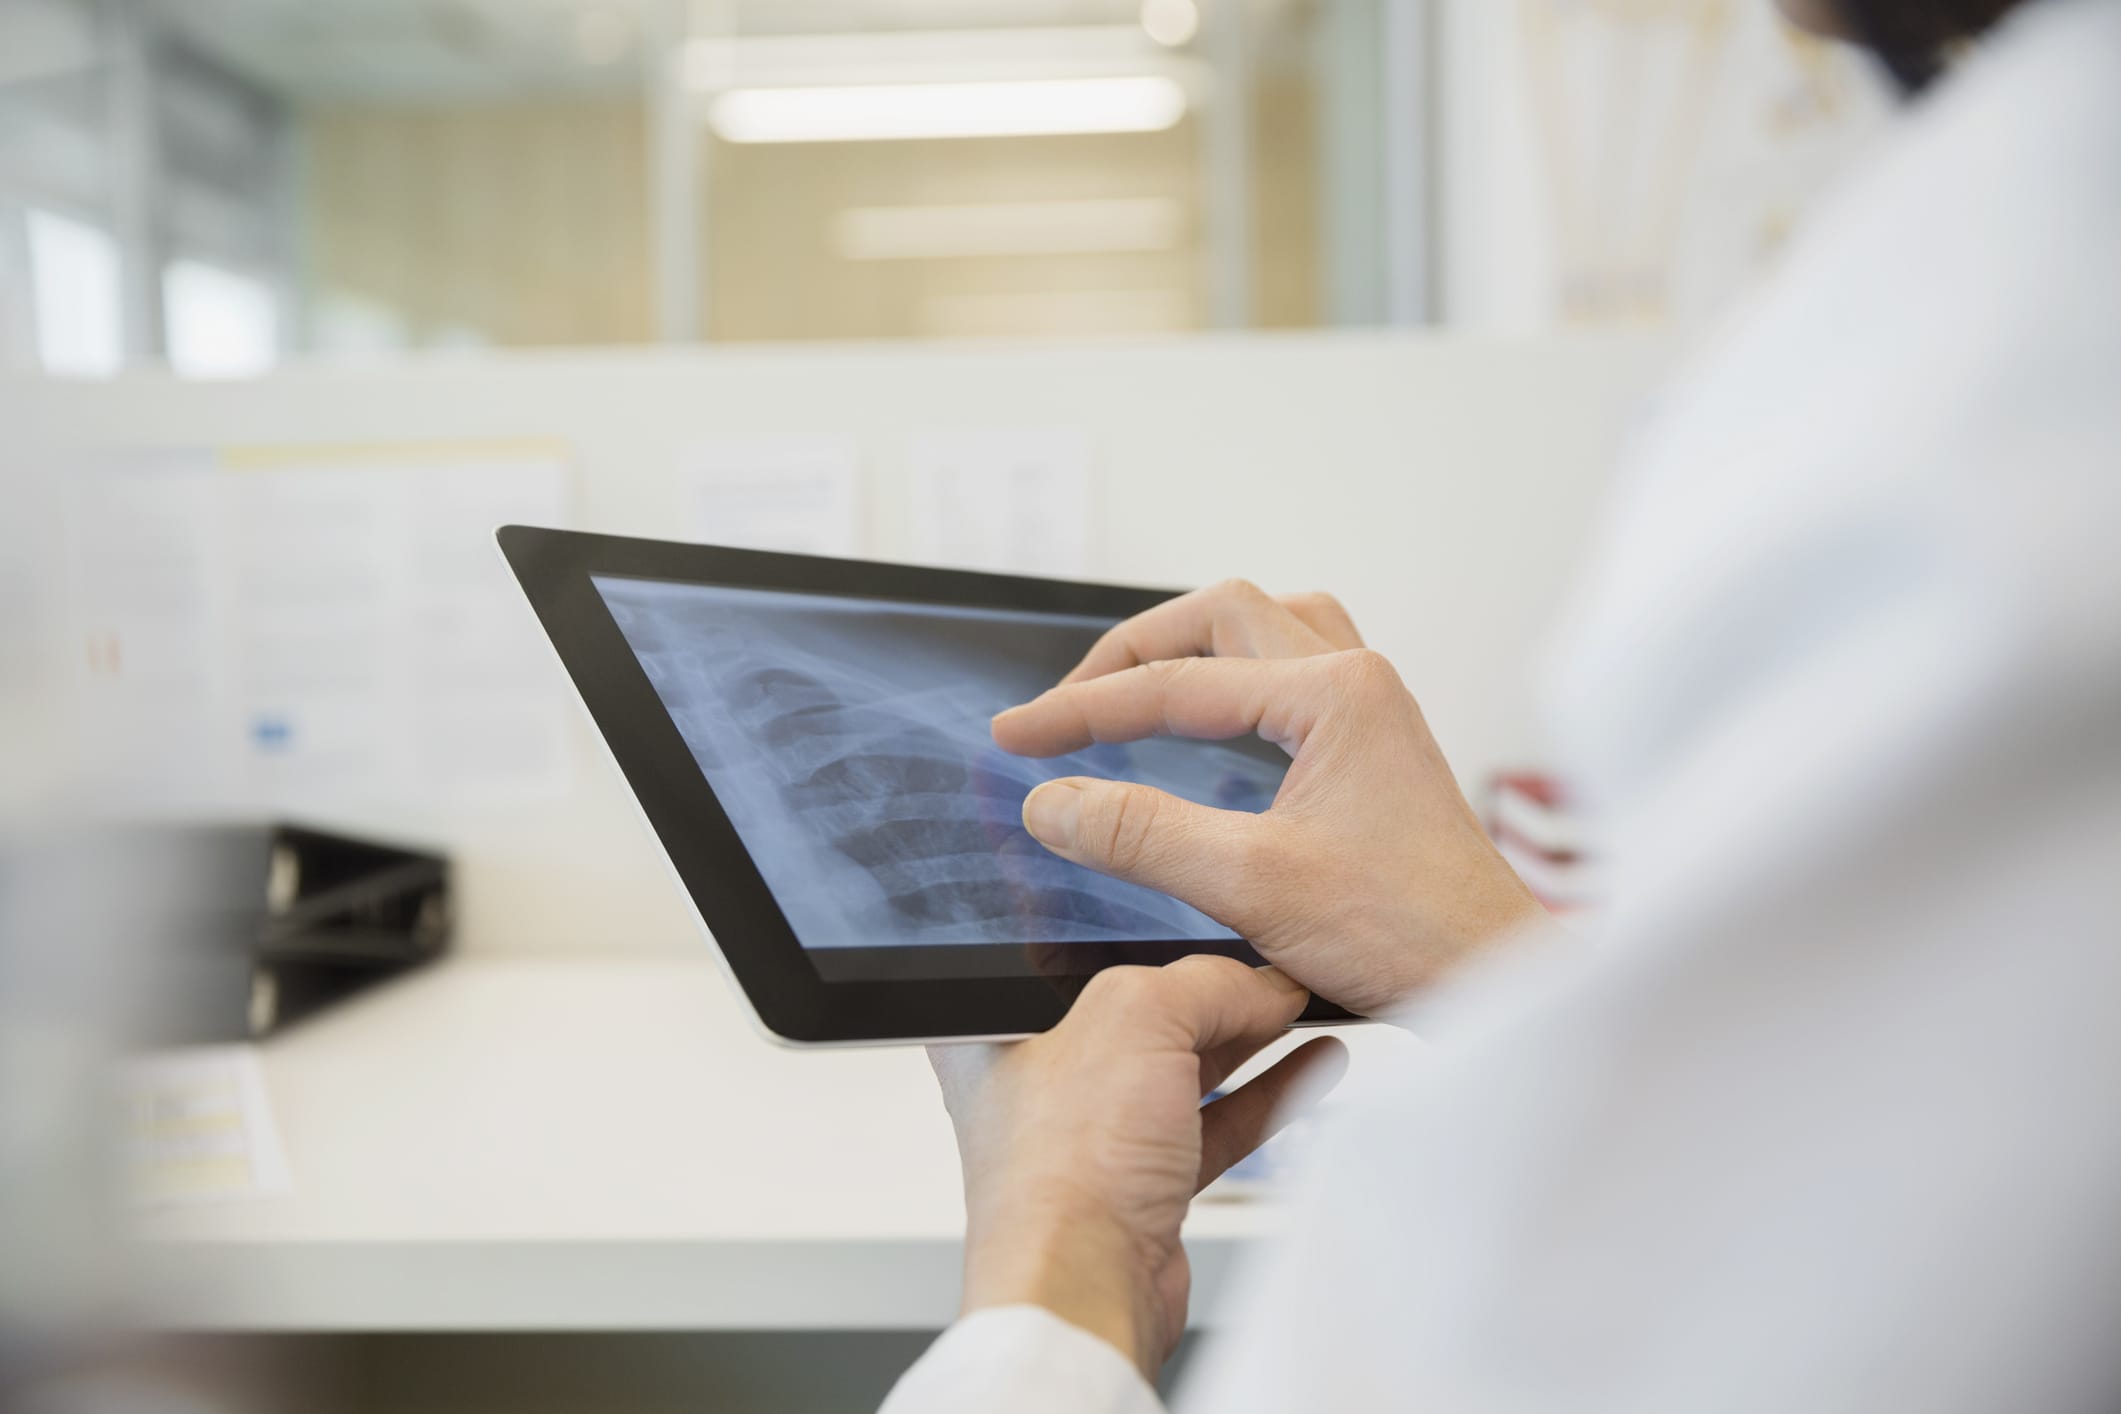 An immotherapist reviews a cancer patient's imaging scans on a tablet